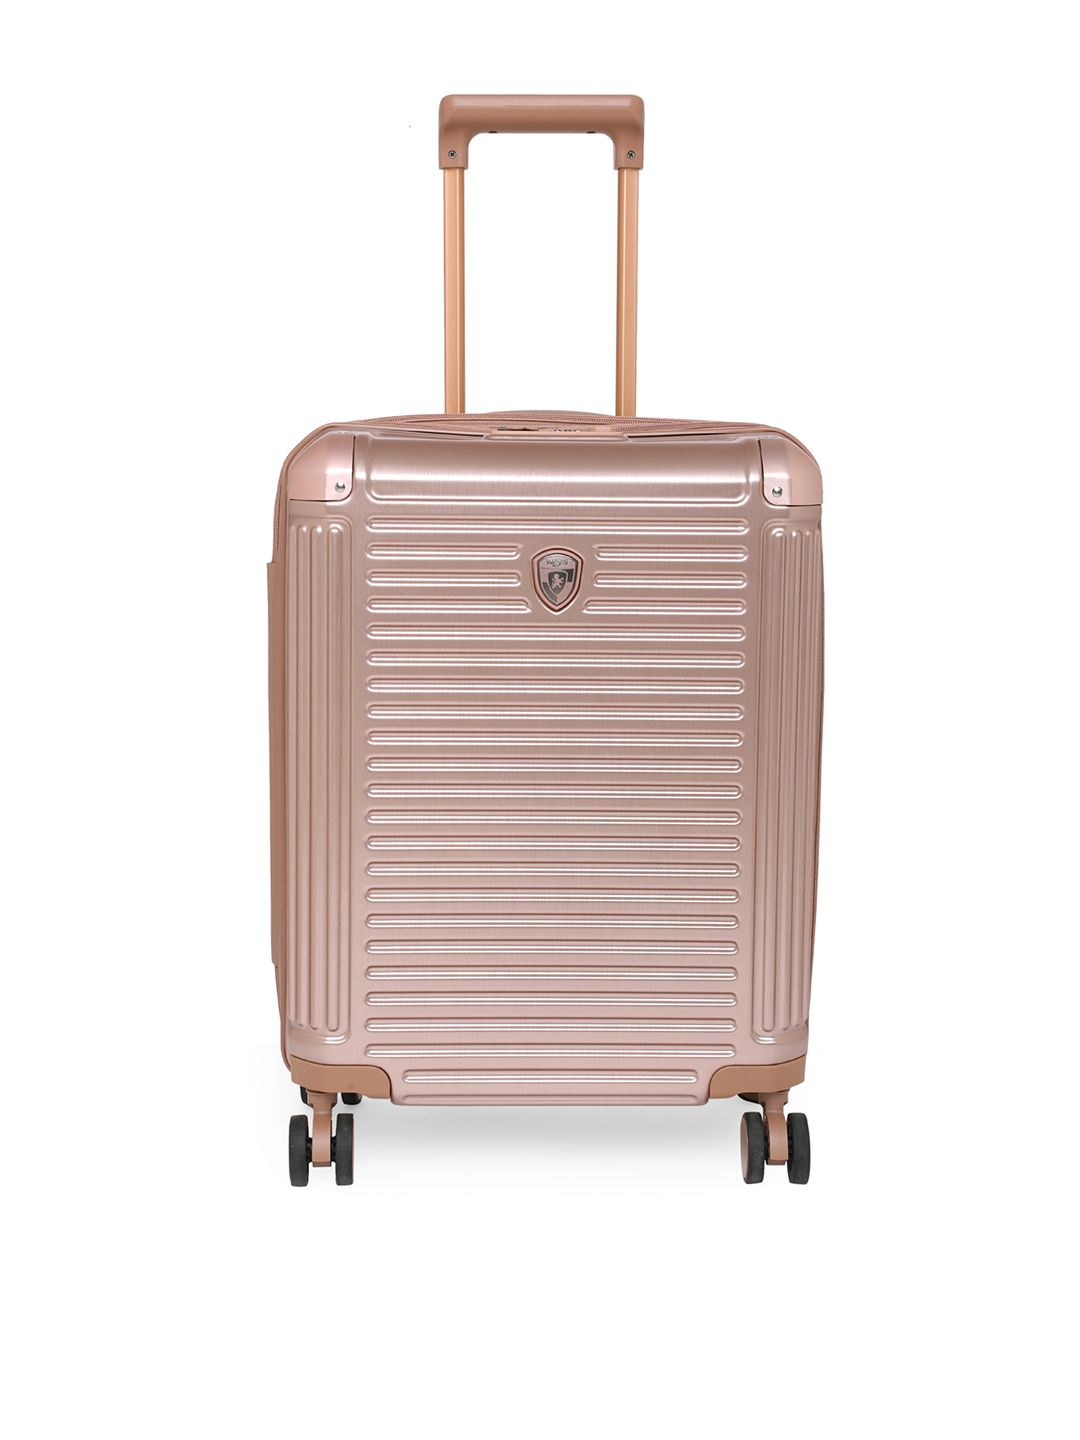 Heys Rose Gold Color Hard Case Luggage 21 Inch Trolley Bag Price in India